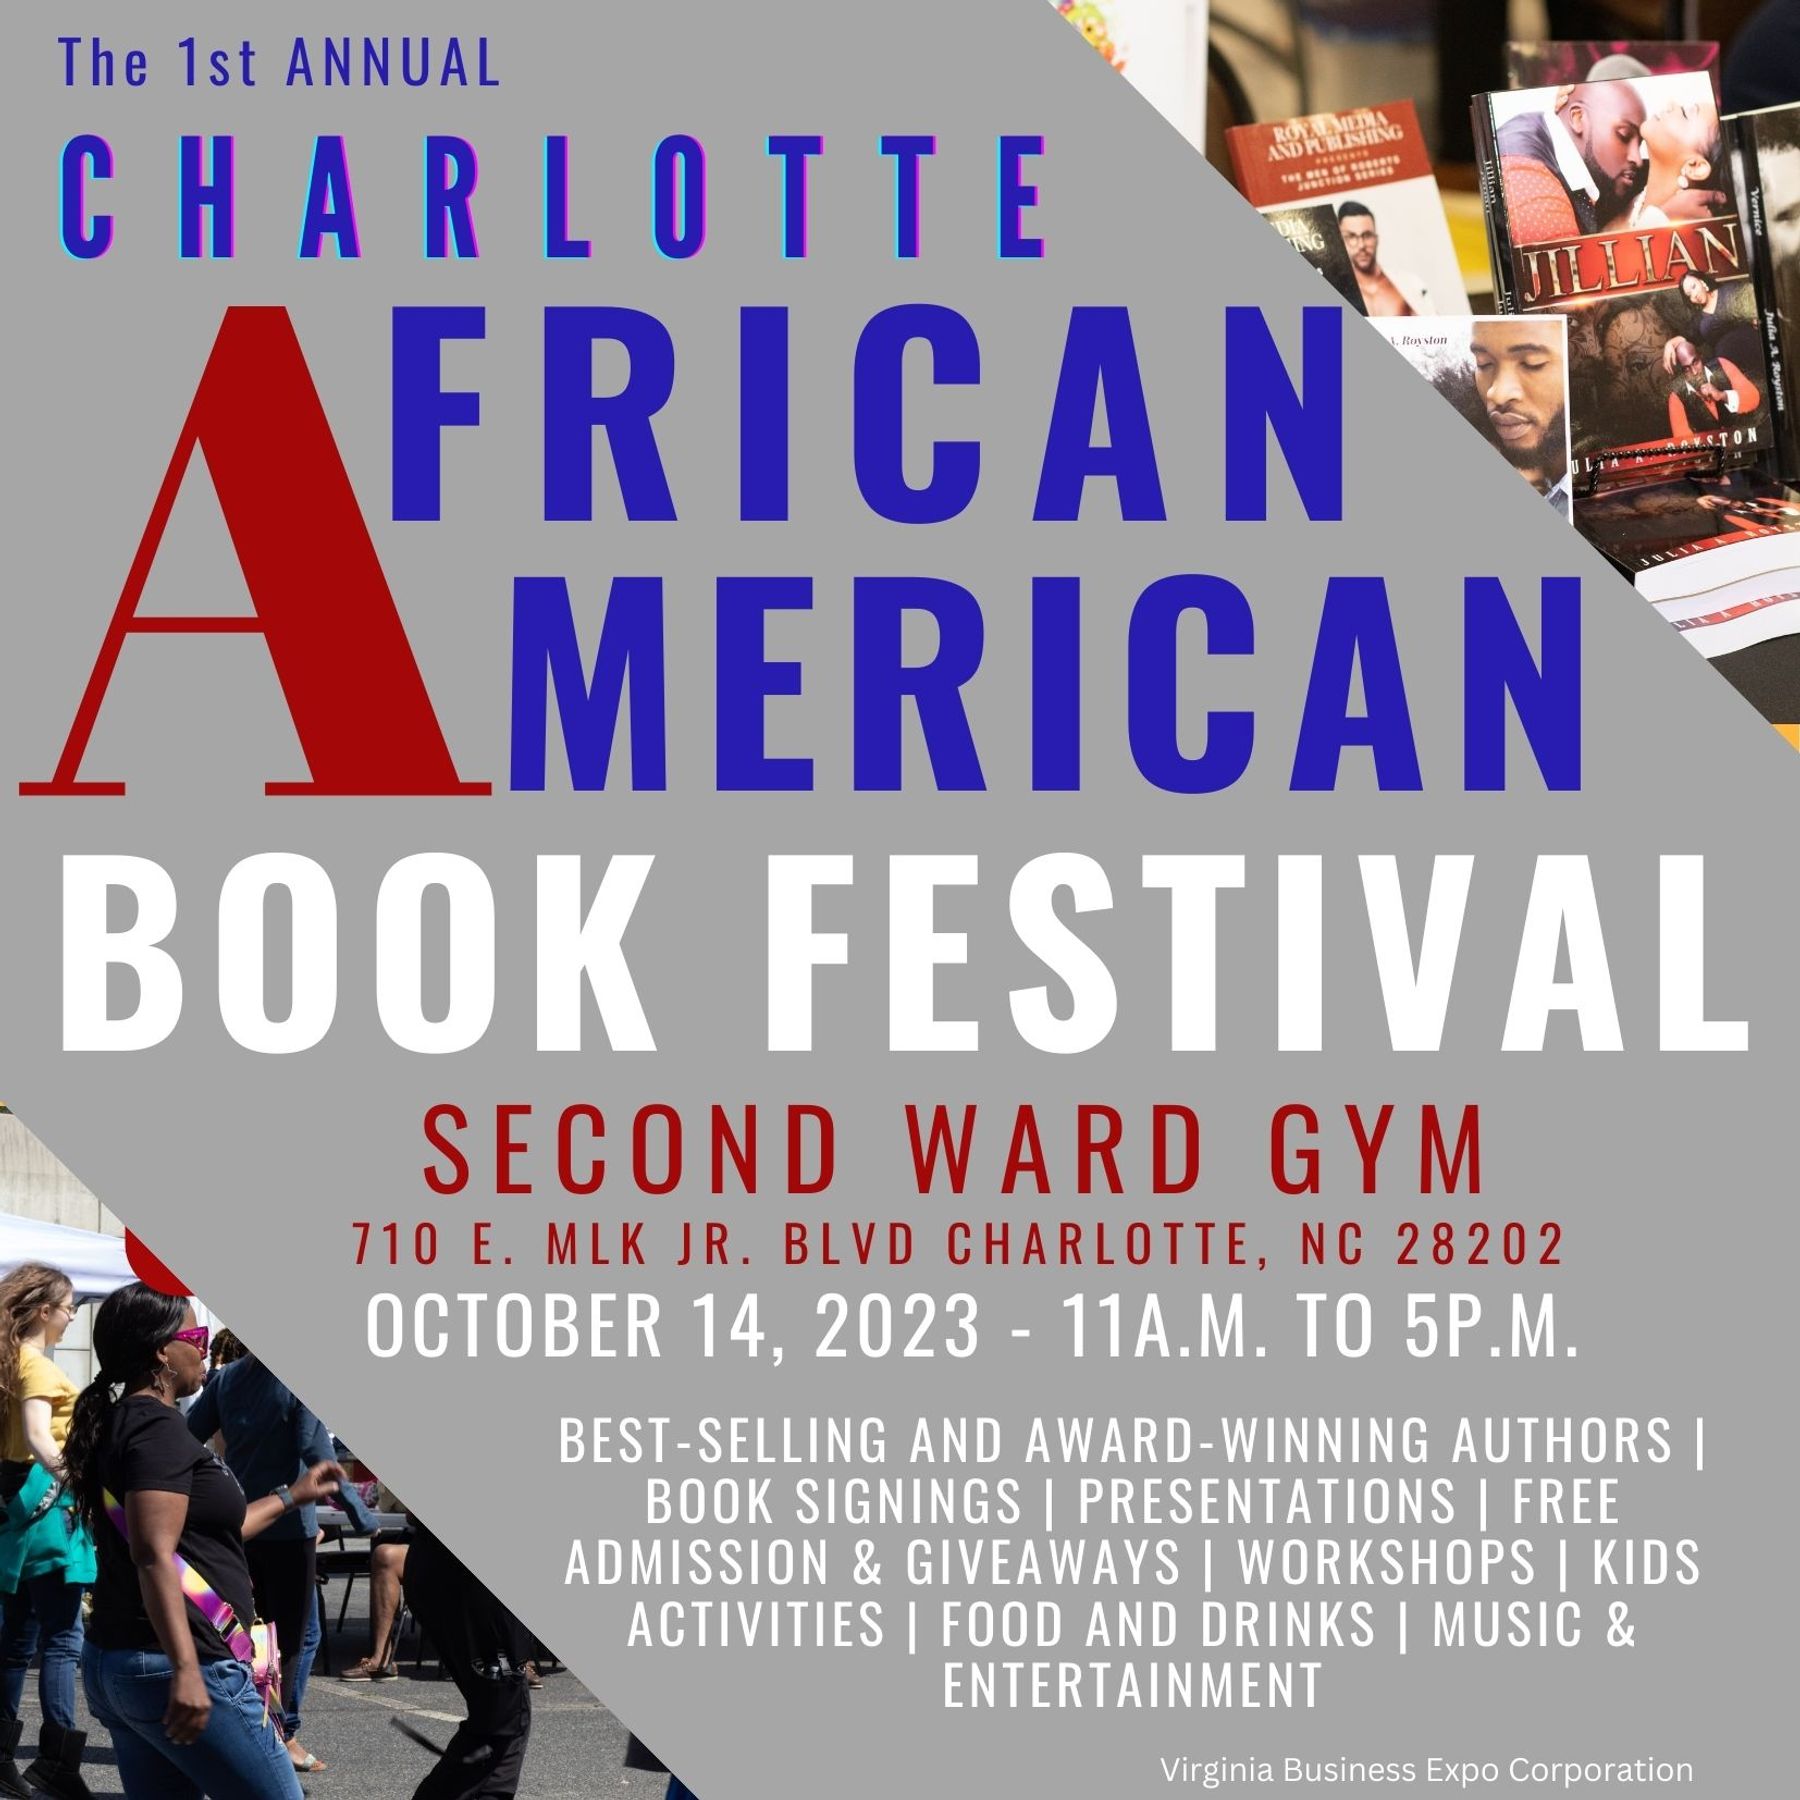 Charlotte African American Book Festival Uptown Charlotte, NC